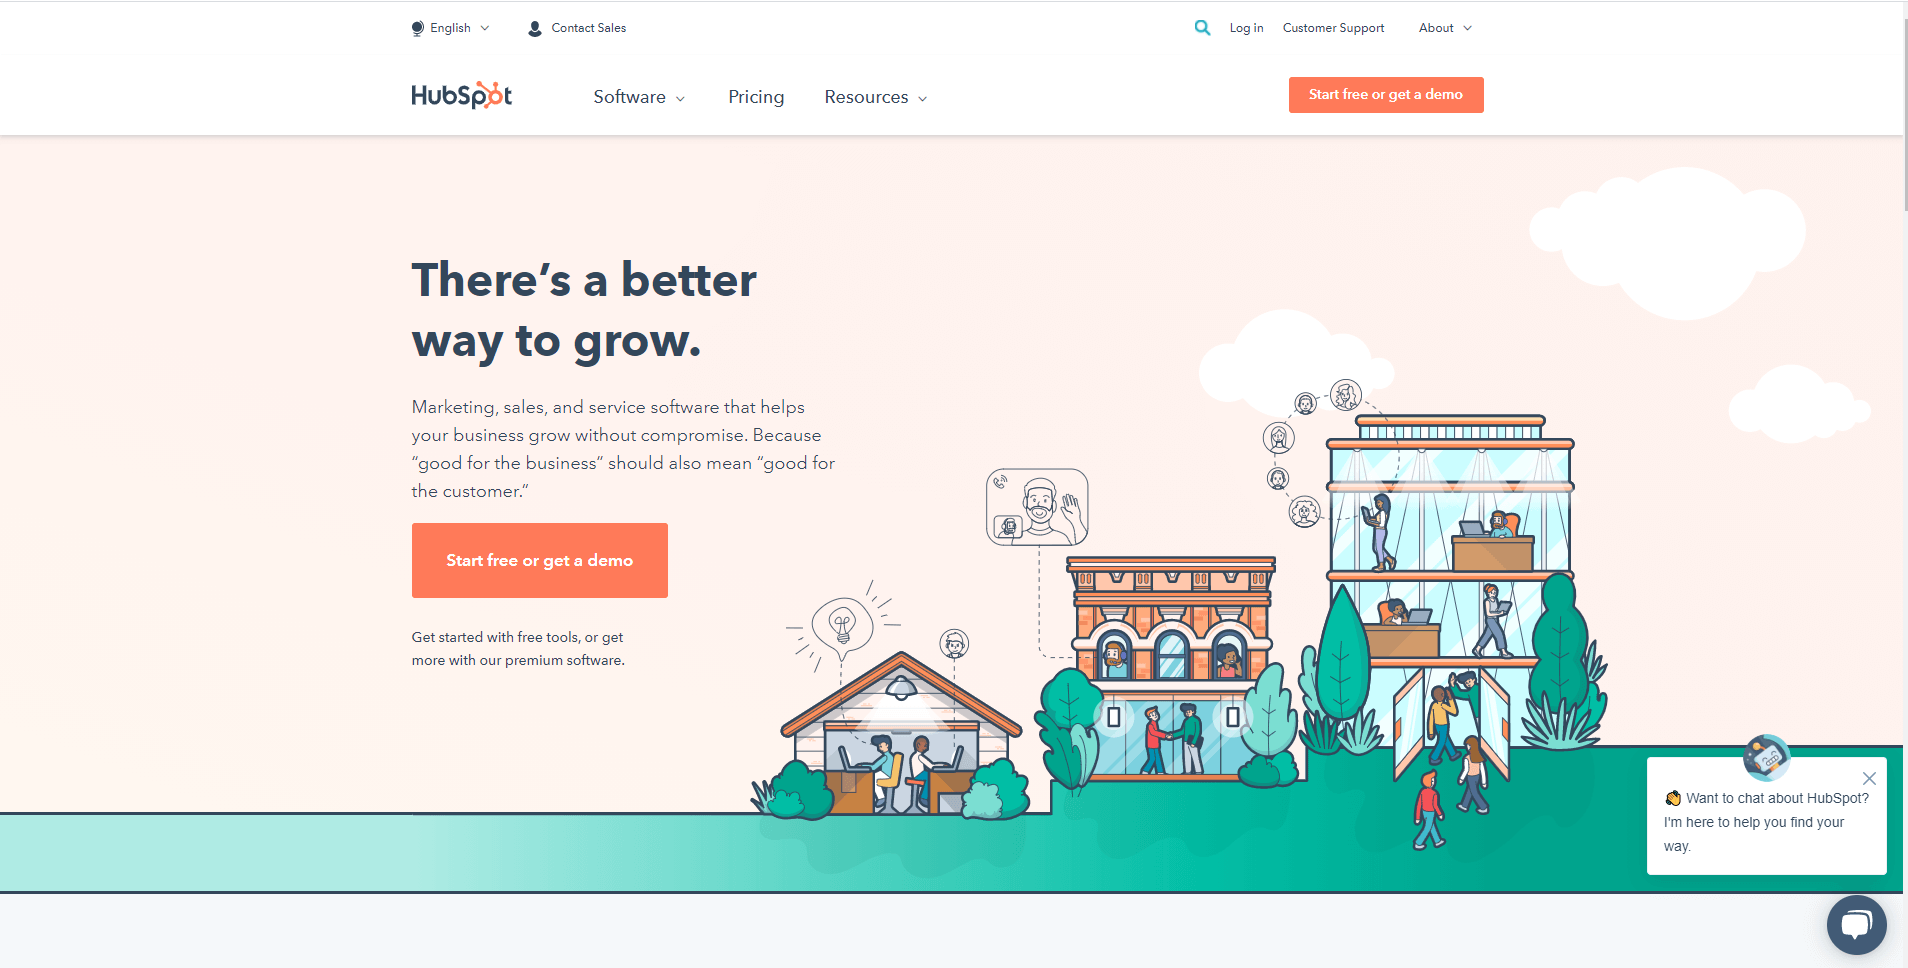 Hubspot uses a large hero section with an image and calls to action.